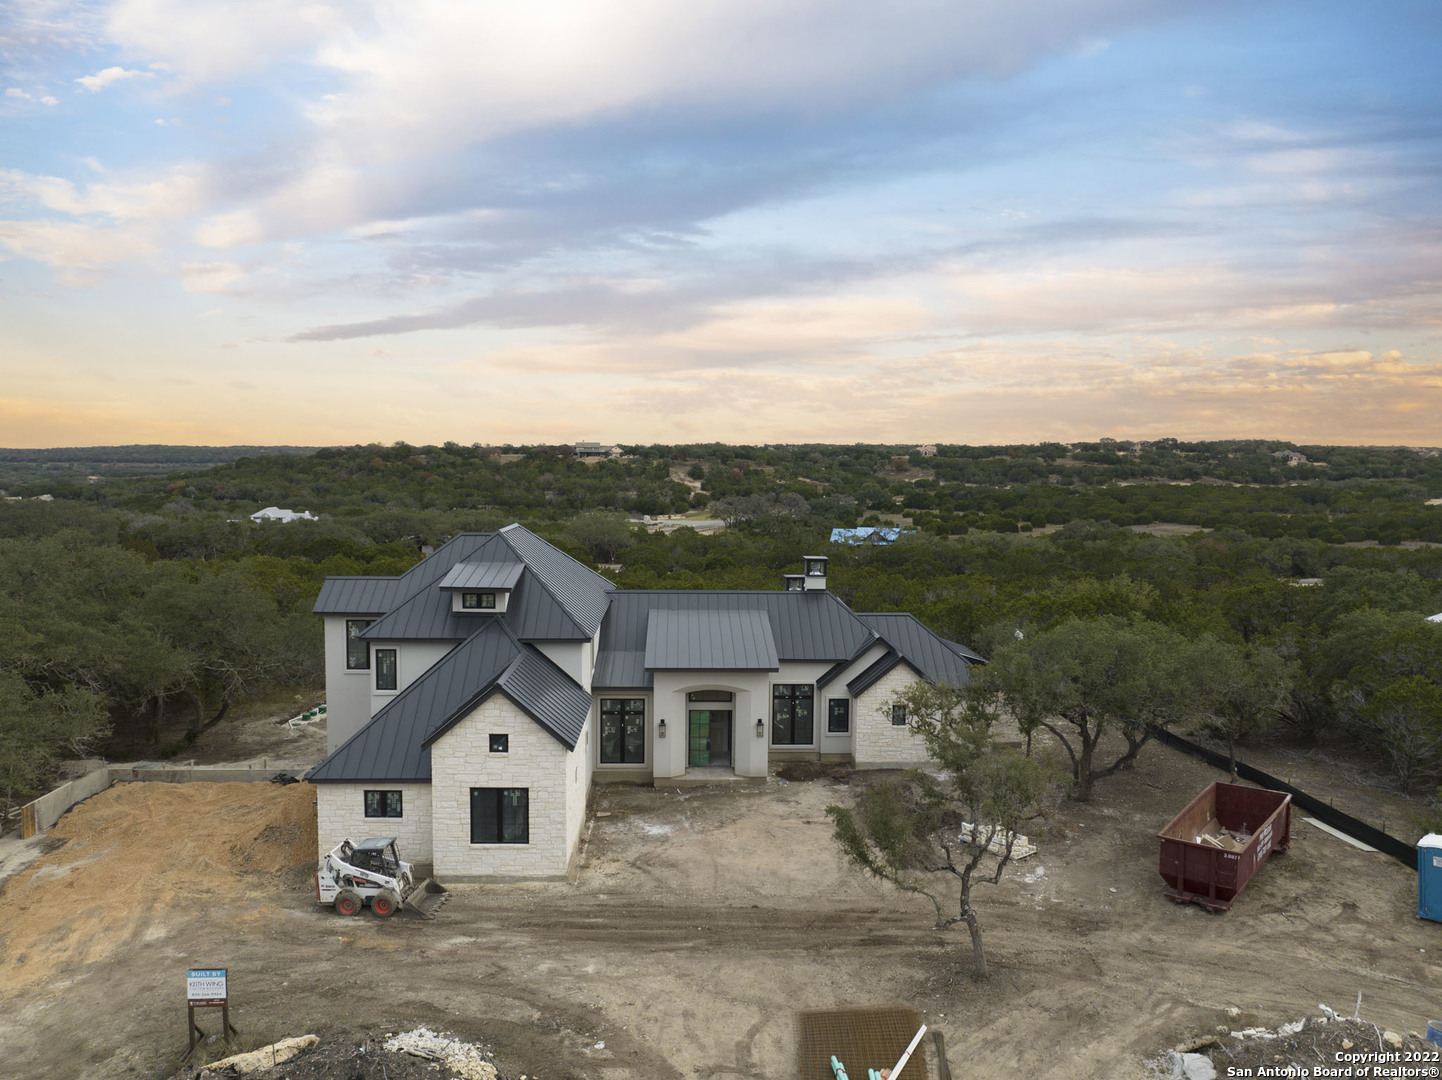 Brand new Keith Wing Custom Builder home in process in the exclusive Paradise on the Guadalupe, Canyon Lake TX. Situated on a quiet street in a gated section on a spacious 1.4 acre lot. Architecturally designed & engineered w/ this beautiful lot, natural surroundings, & today's buyer in mind. Open concept includes 5 bedrooms, 5.5 bathrooms, 3-car attached garage, mudroom, dining room, living room, outdoor kitchen among the many other custom extras. Beautifully designed pool will be ready to enjoy. Lake Access for swimming, kayaking, and seasonal community activities. Close to New Braunfels, Bulverde, Blanco, for Shopping and Dining, & just 40 mins to the San Antonio Airport and downtown. Inquire for builder specs, site plan, & floor plans.